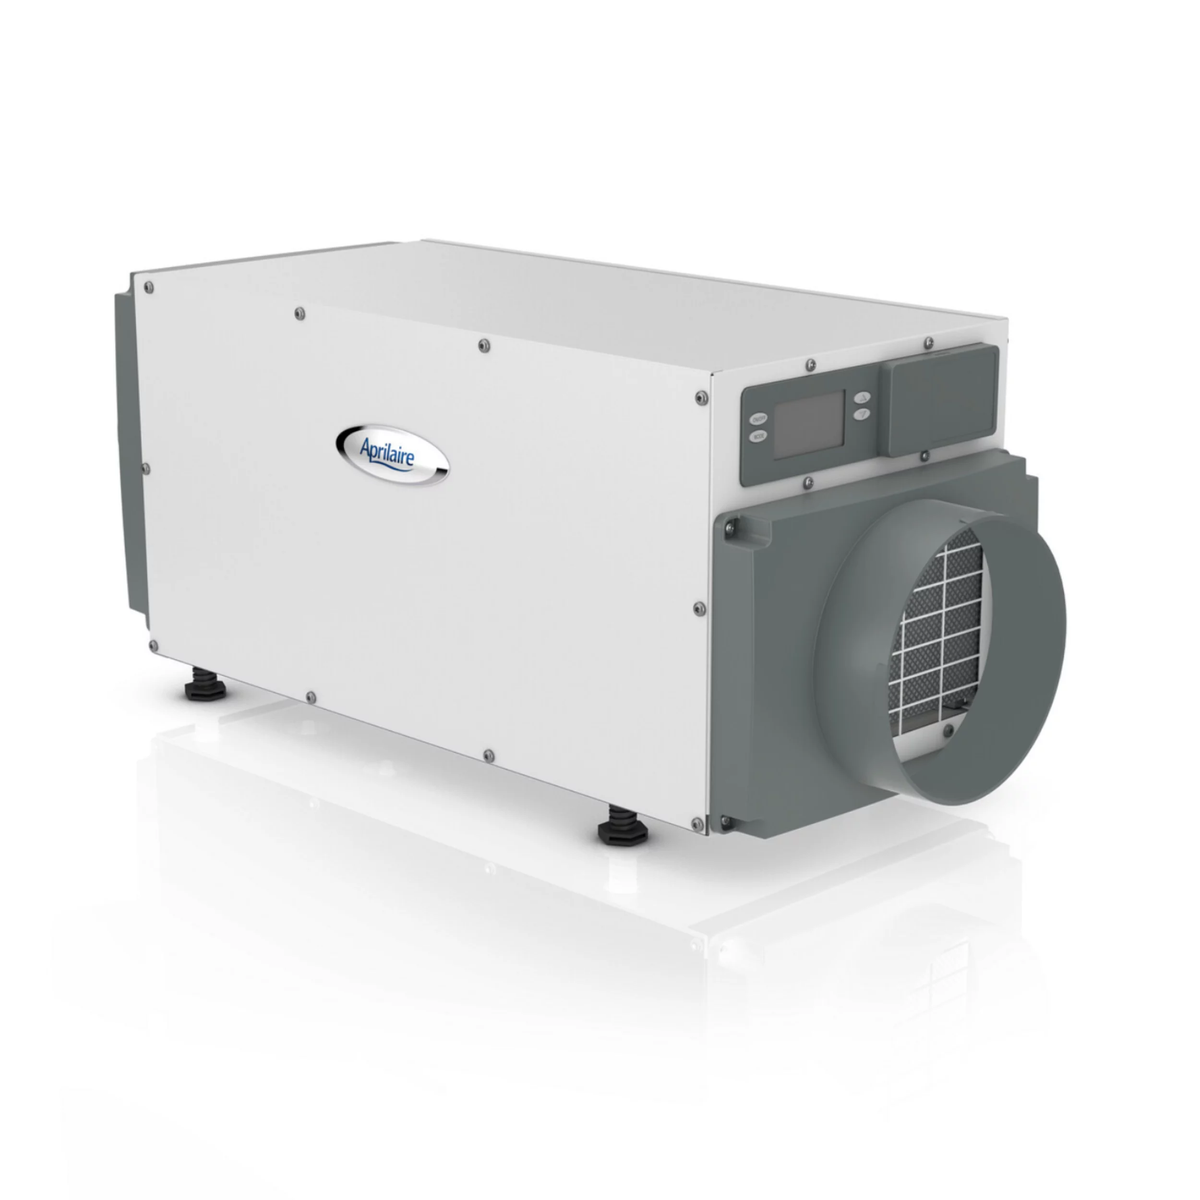 E070 Aprilaire 70 Pint Professional-Grade Crawl Space Dehumidifier Coverage Up to 2,200 Sq. Ft., 200 CFM, R-410A